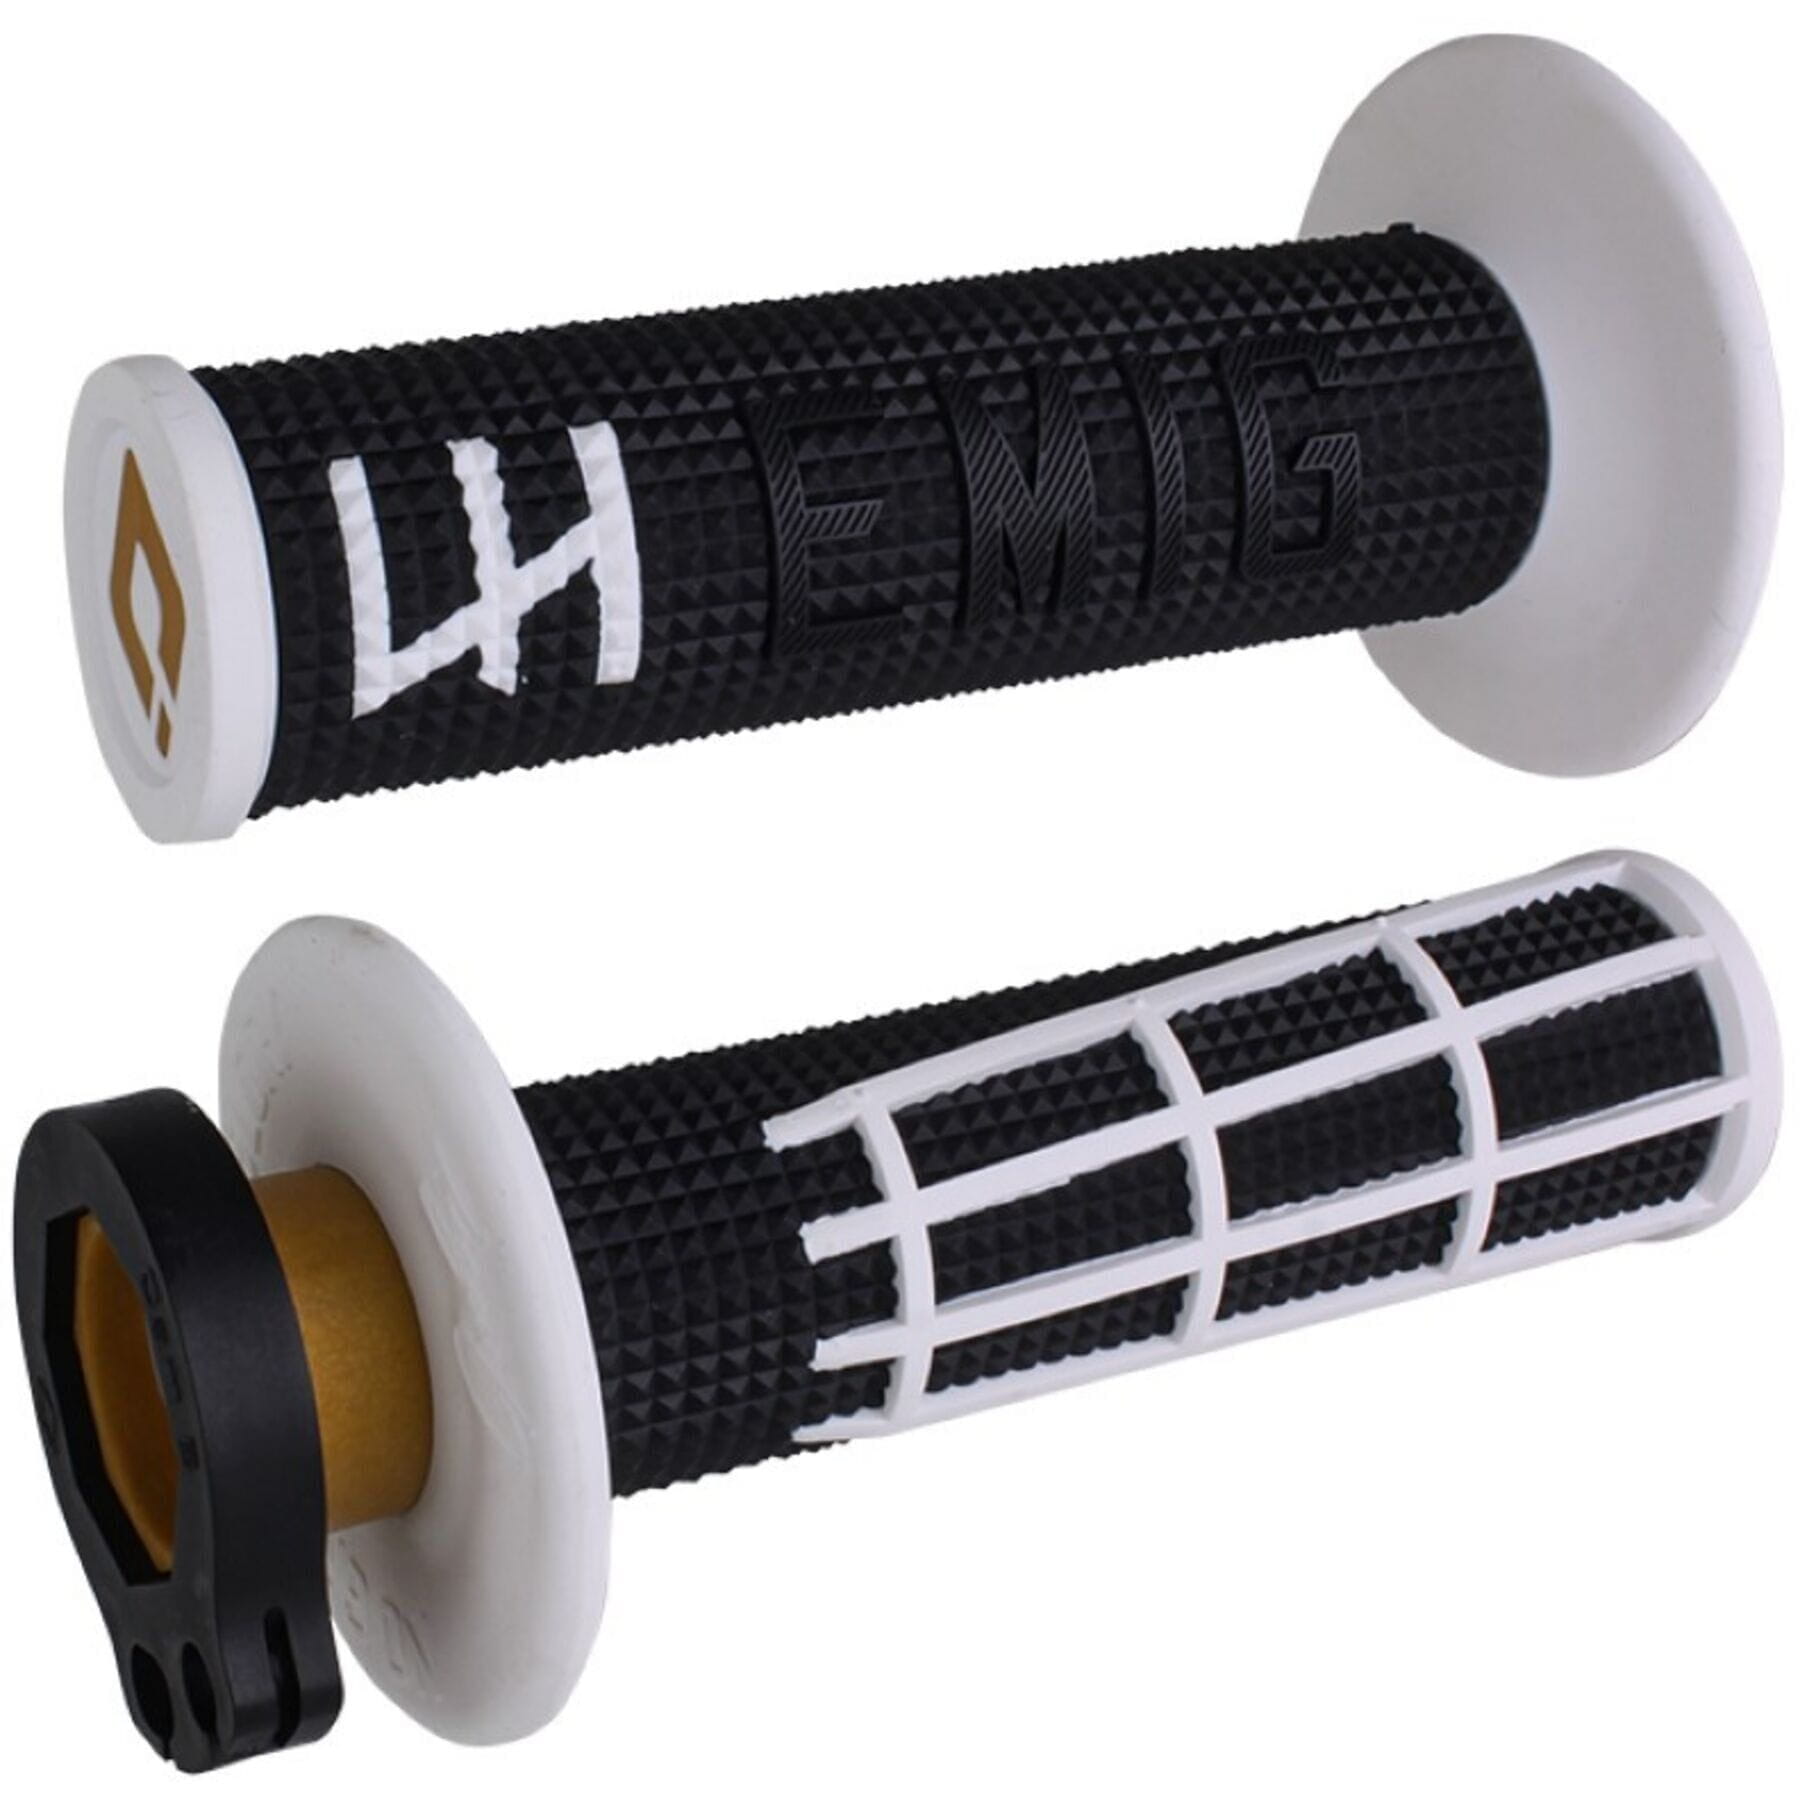 EMIG2 Lock On 2.0 Grip in Black and White for bicycles